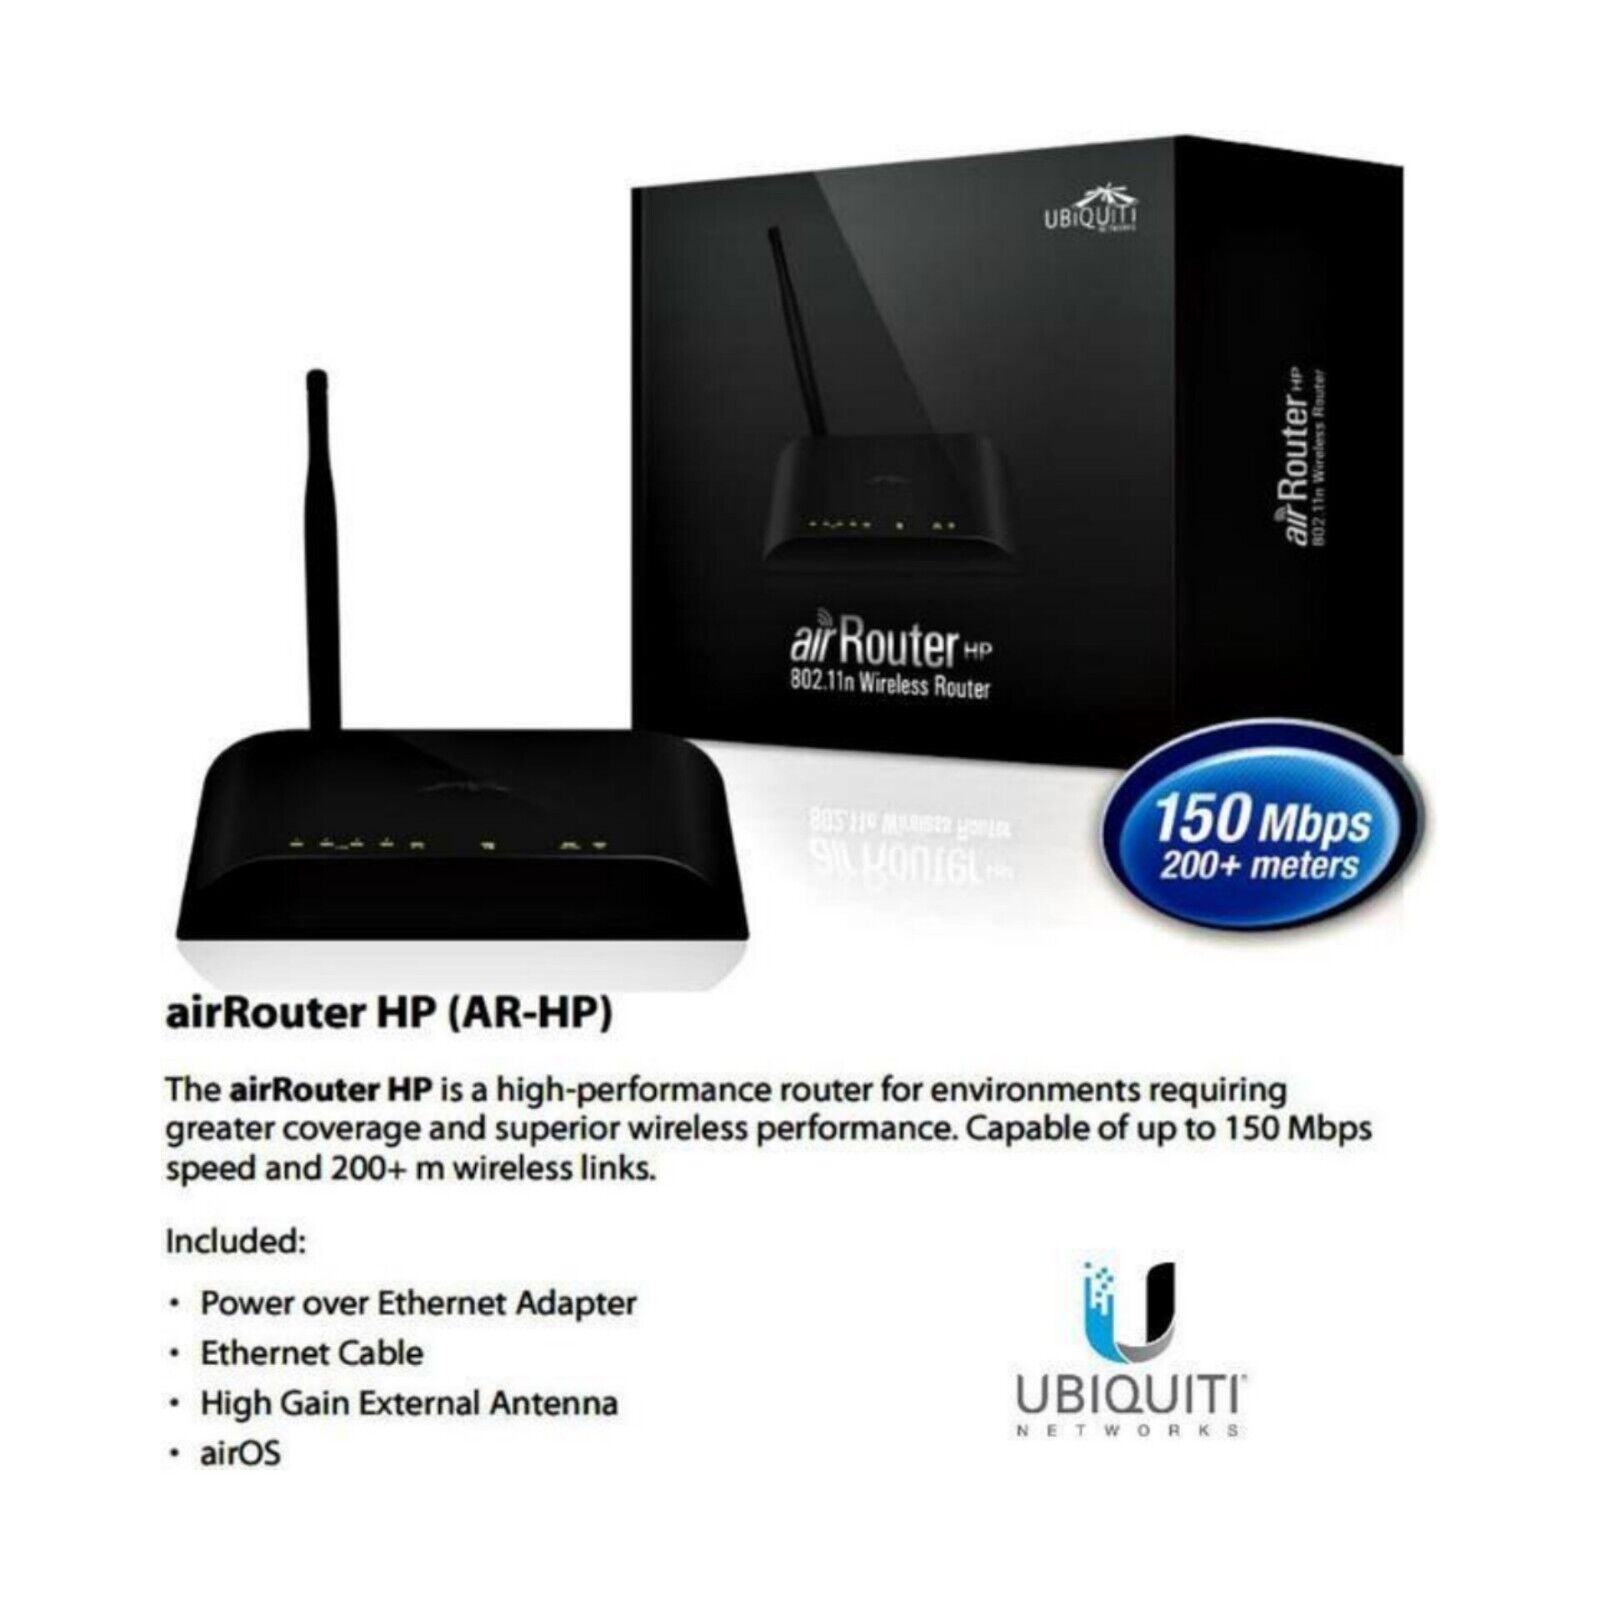 New Ubiquiti Networks airRouter 802.11n Indoor Wireless Router